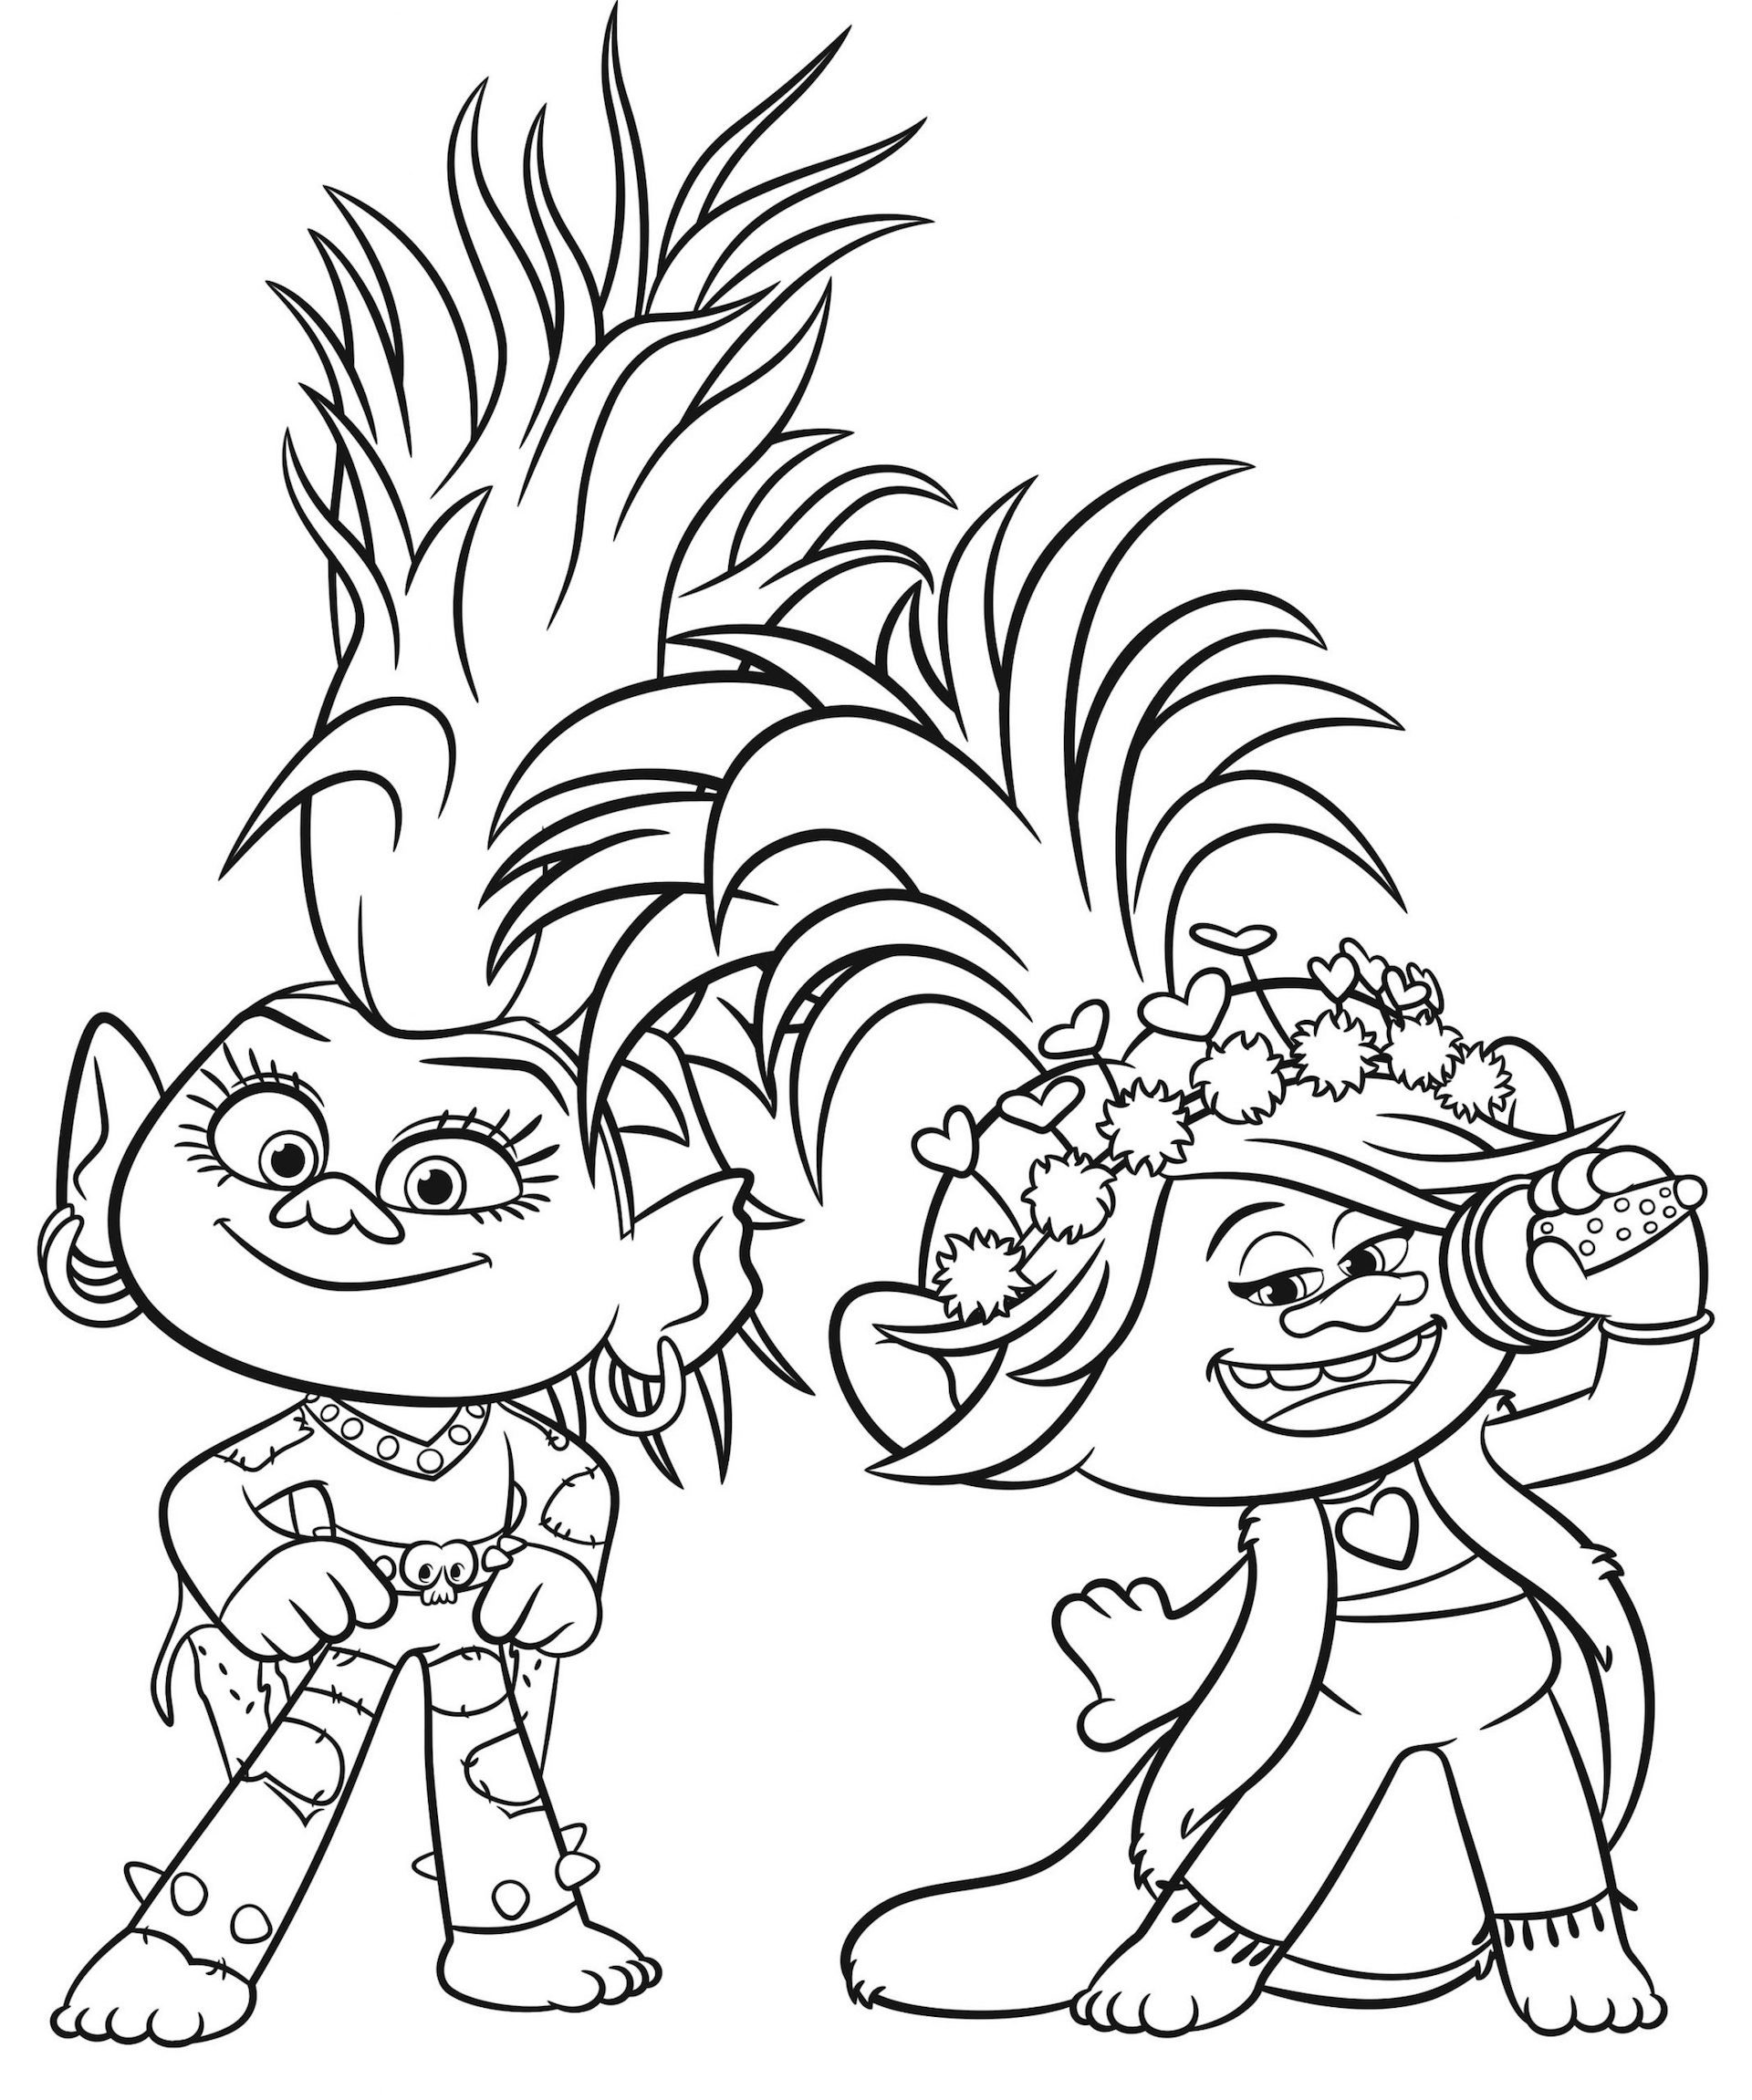 Trolls Coloring Page & book for kids | Best Trolls Coloring pages